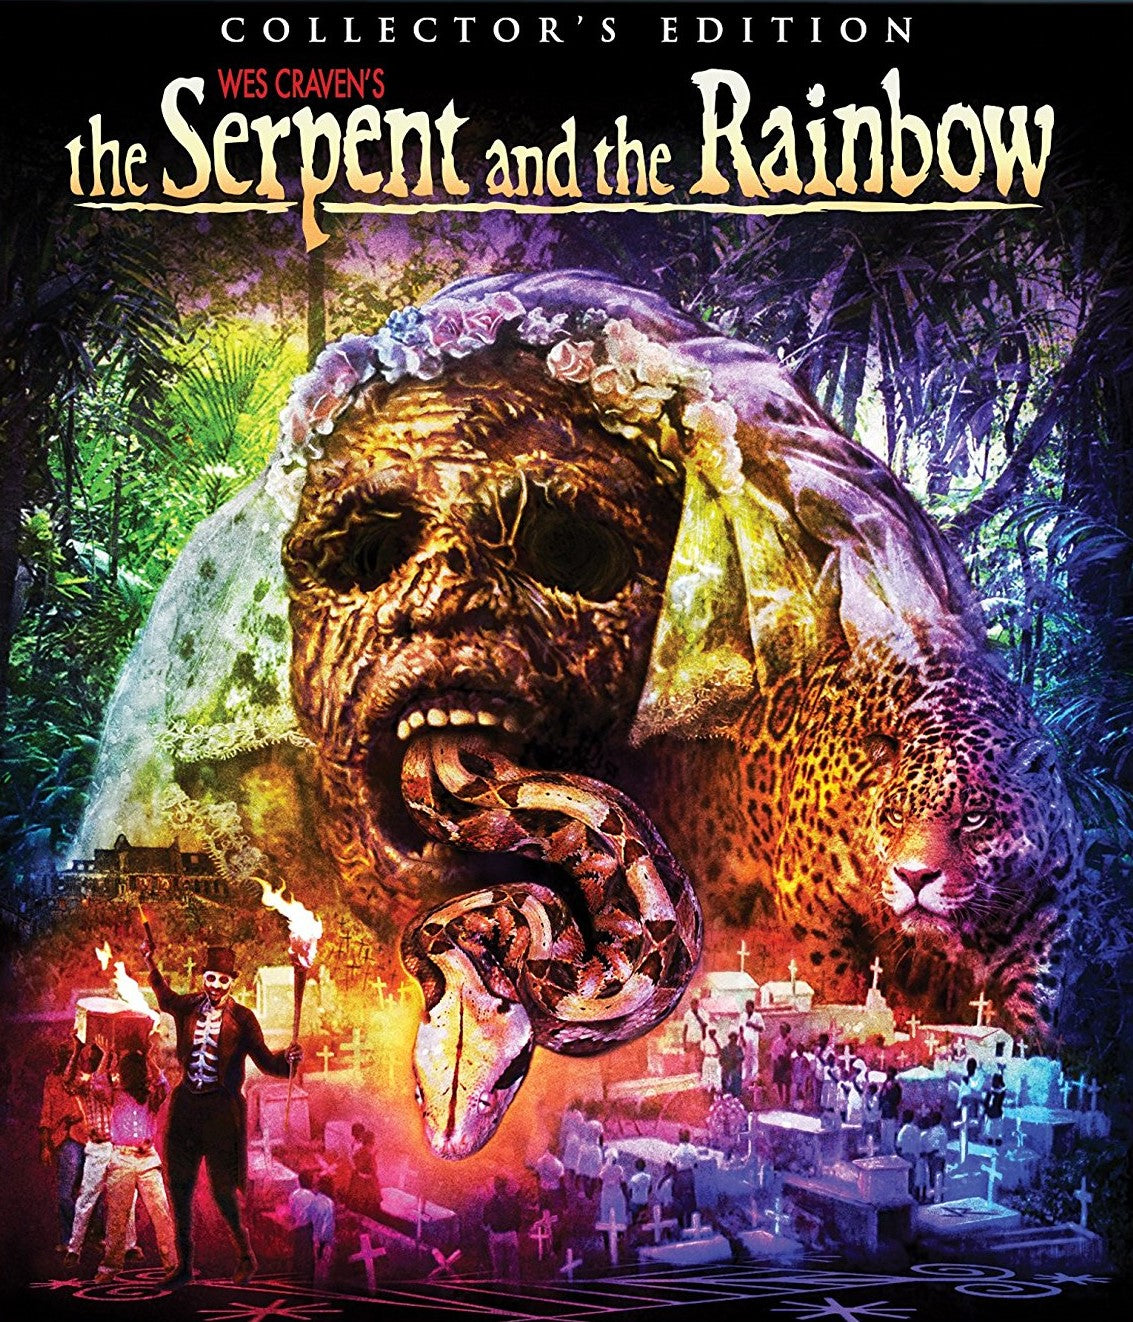 The Serpent And Rainbow (Collectors Edition) Blu-Ray Blu-Ray